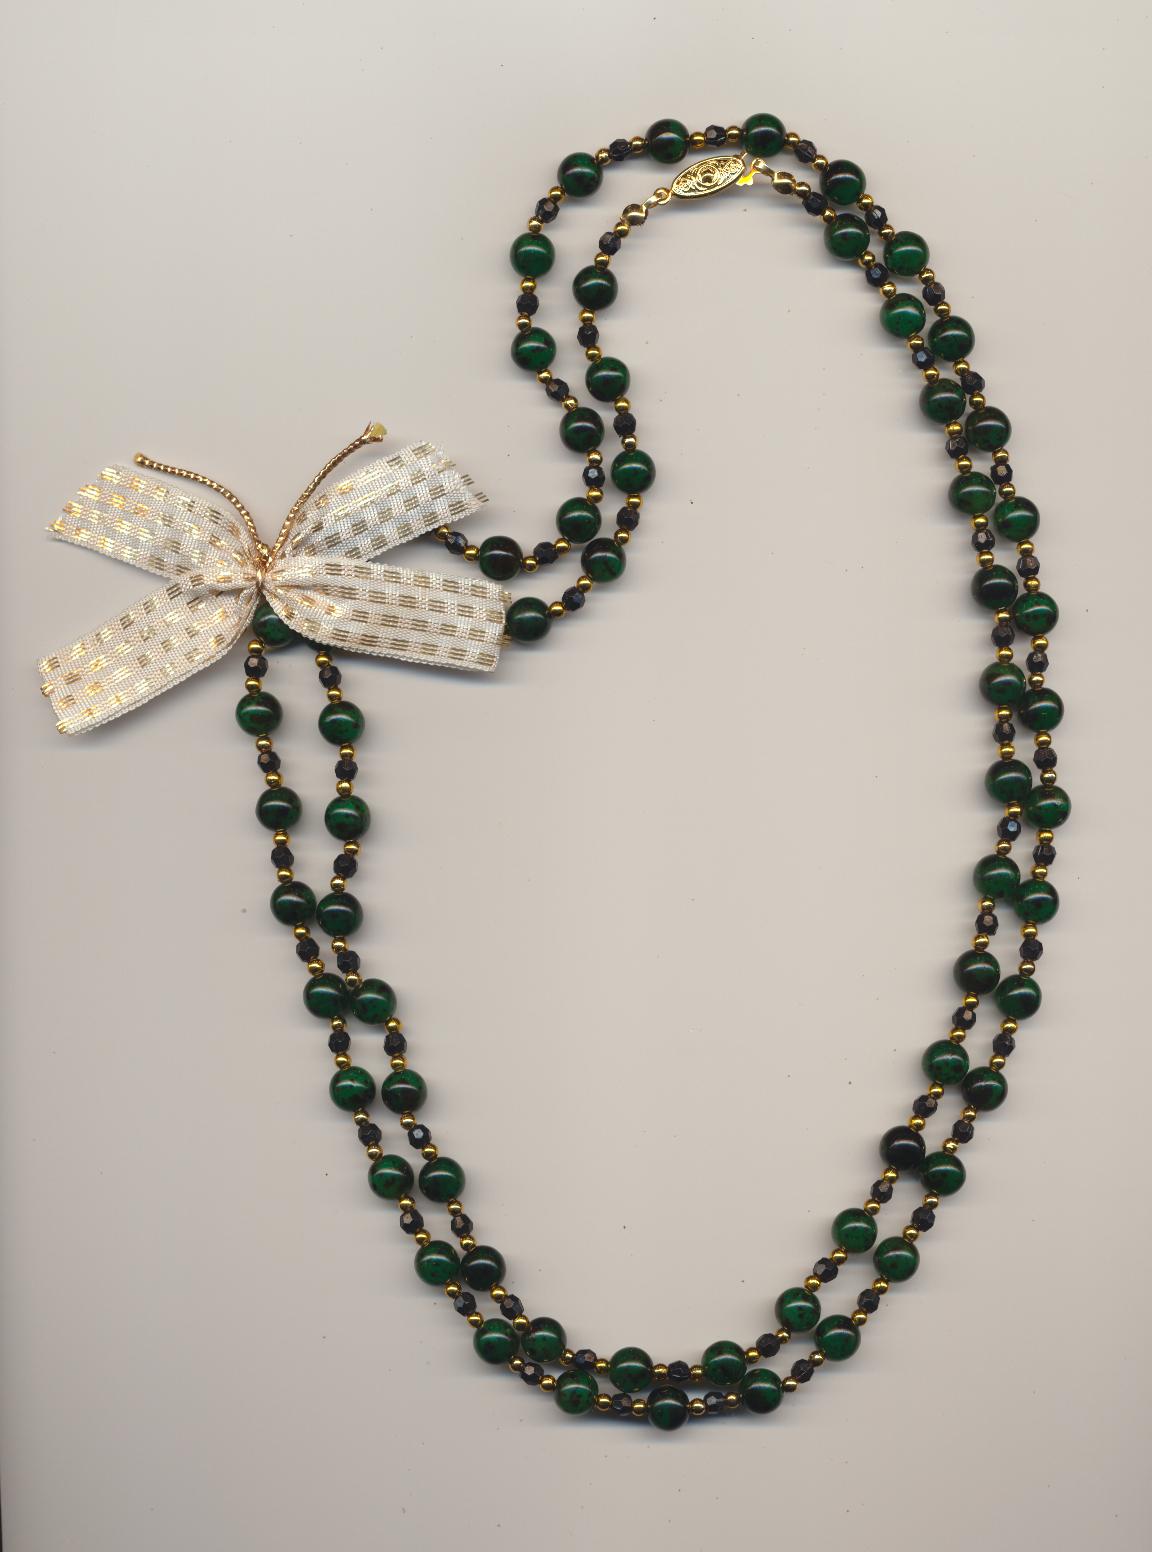 A Necklace With A Brooch With Flair